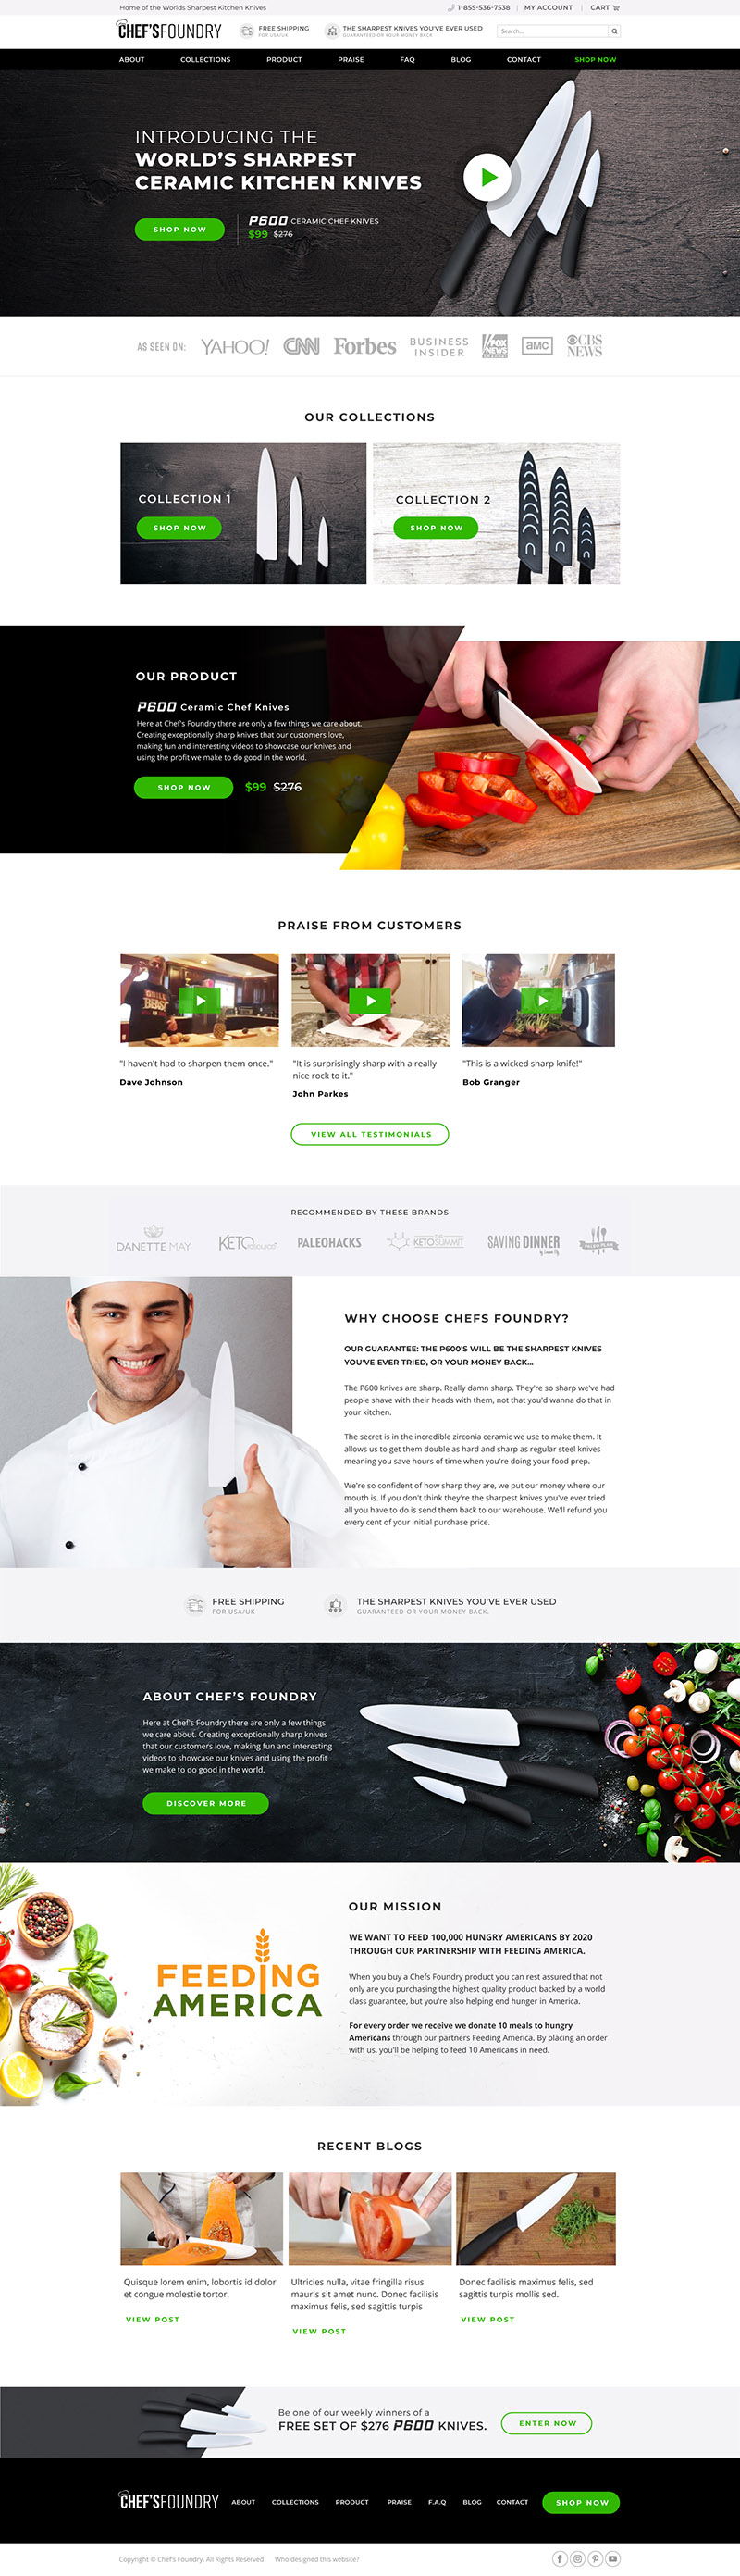 CHEFS-FOUNDRY-HOME-PAGE